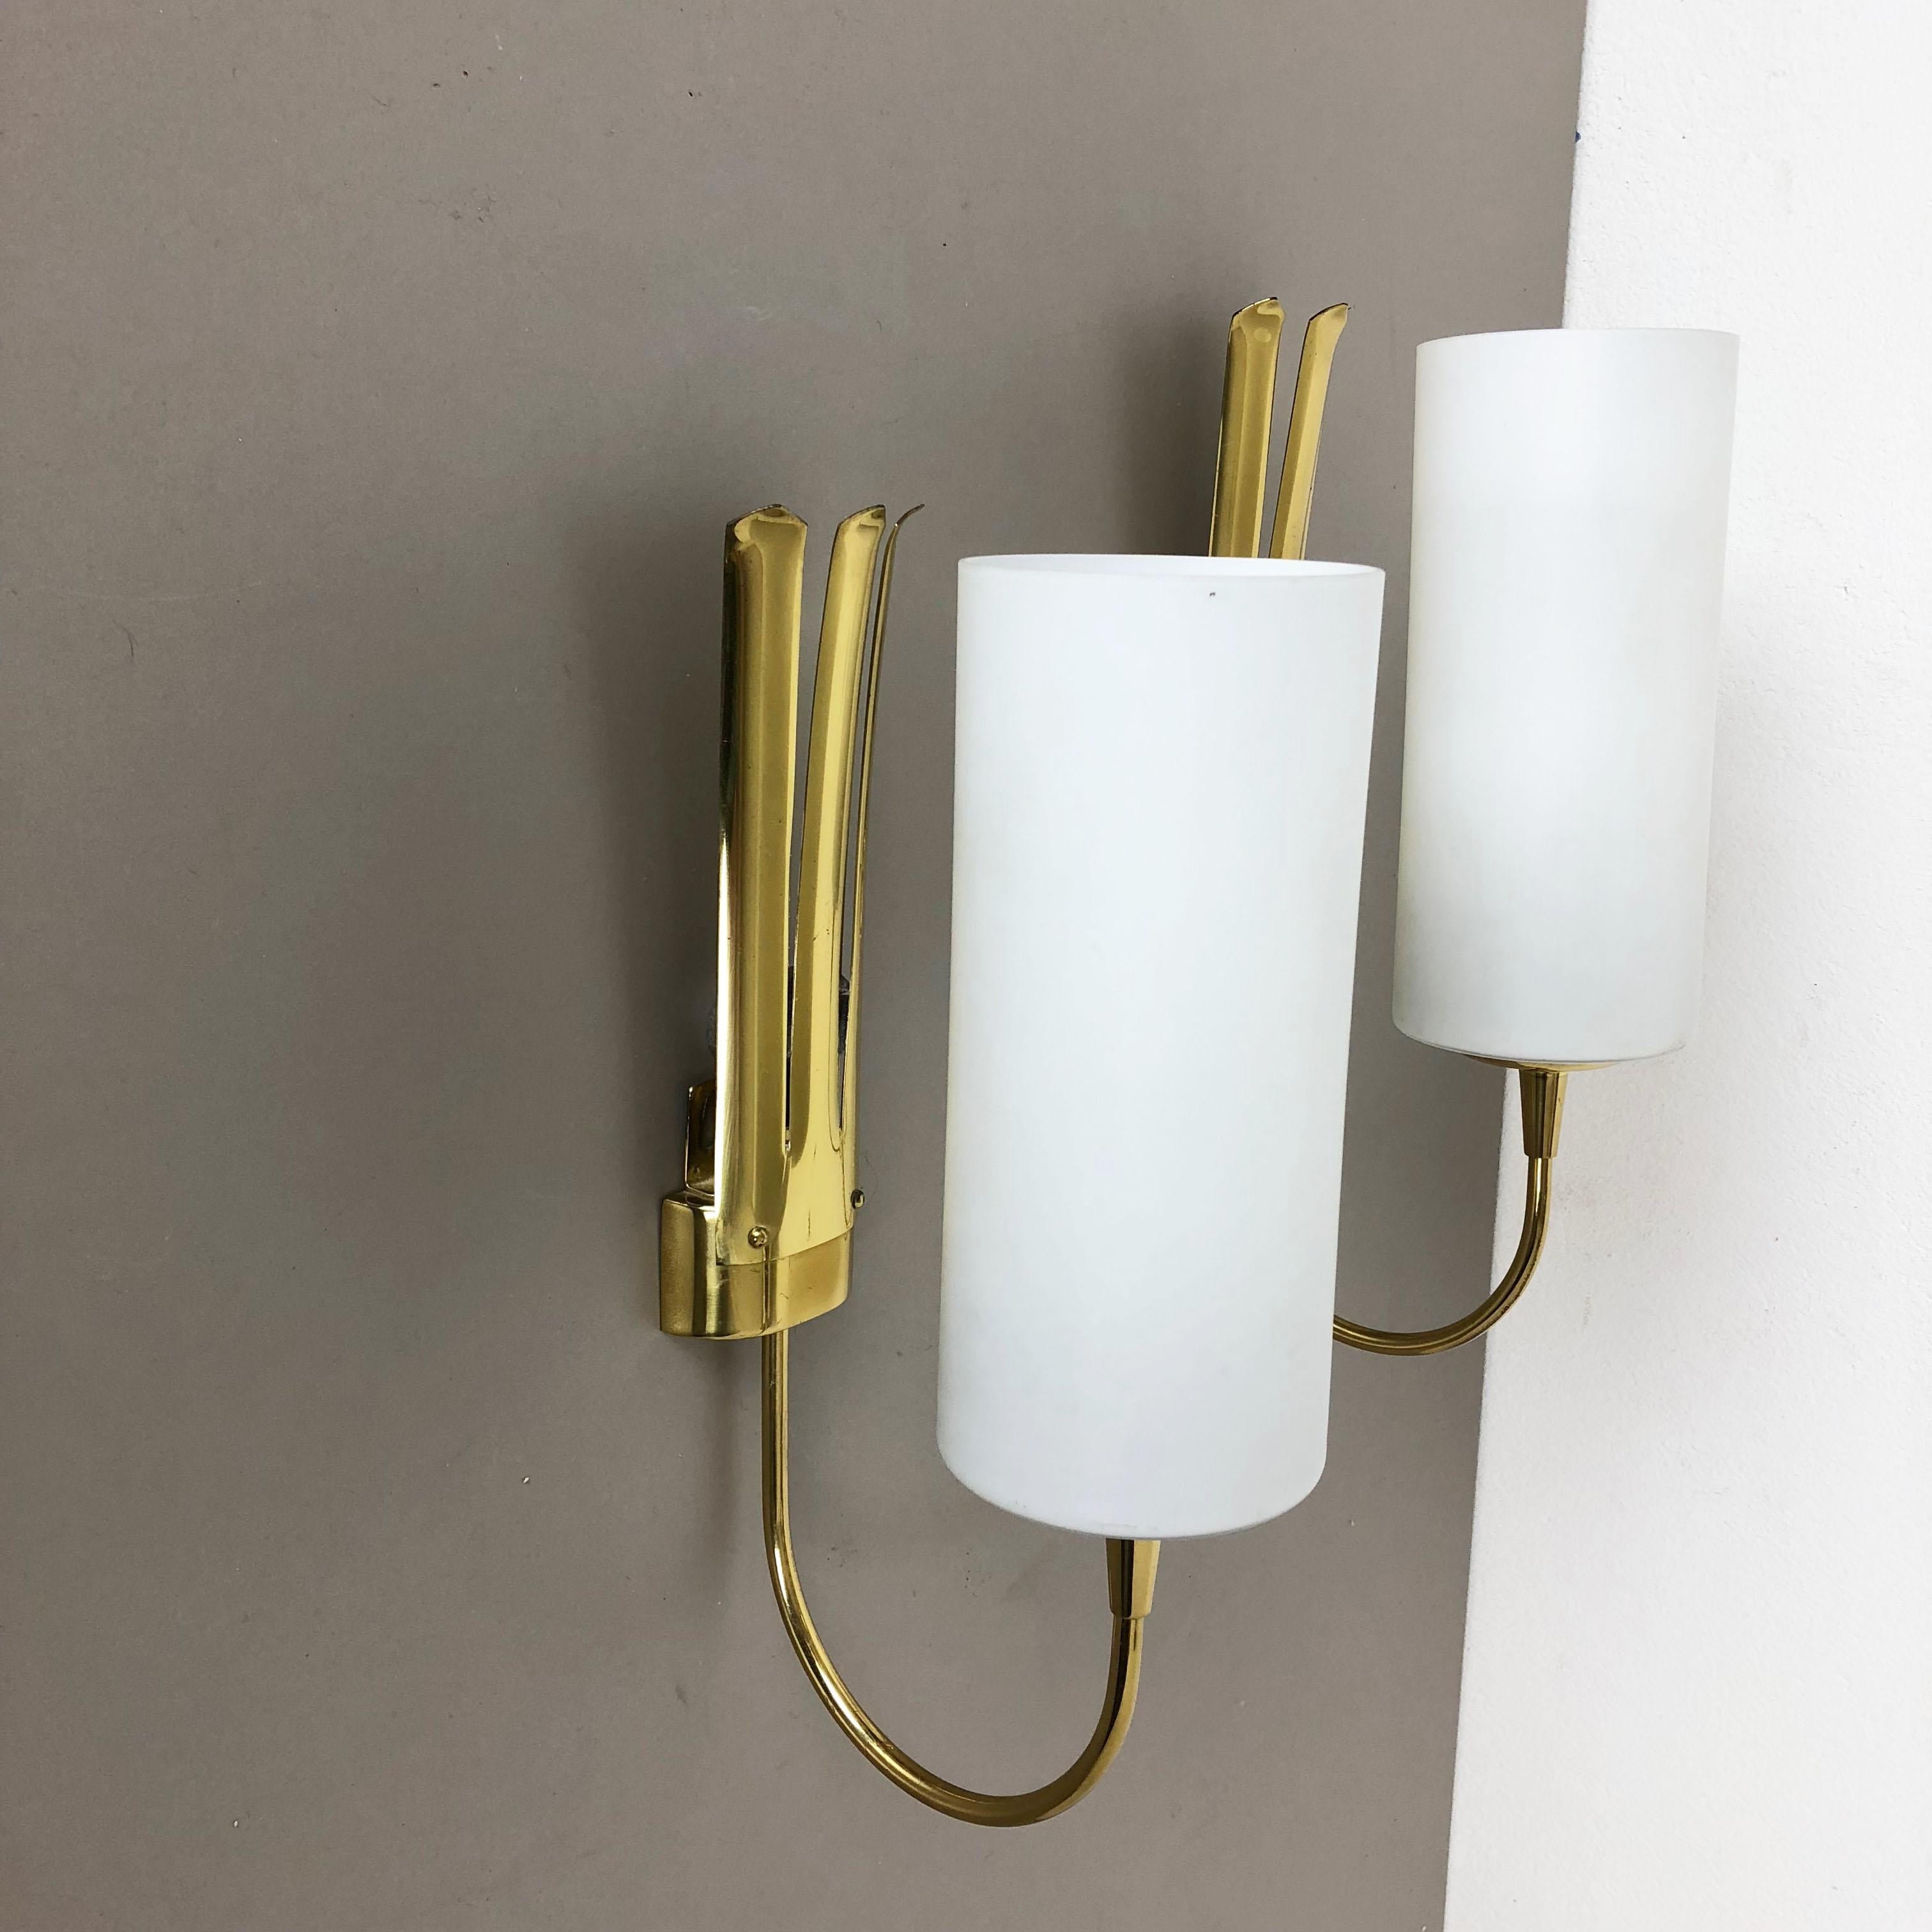 Set of Two Stilnovo Style Brass Italian Wall Lights Sconces, Italy, 1950s For Sale 8